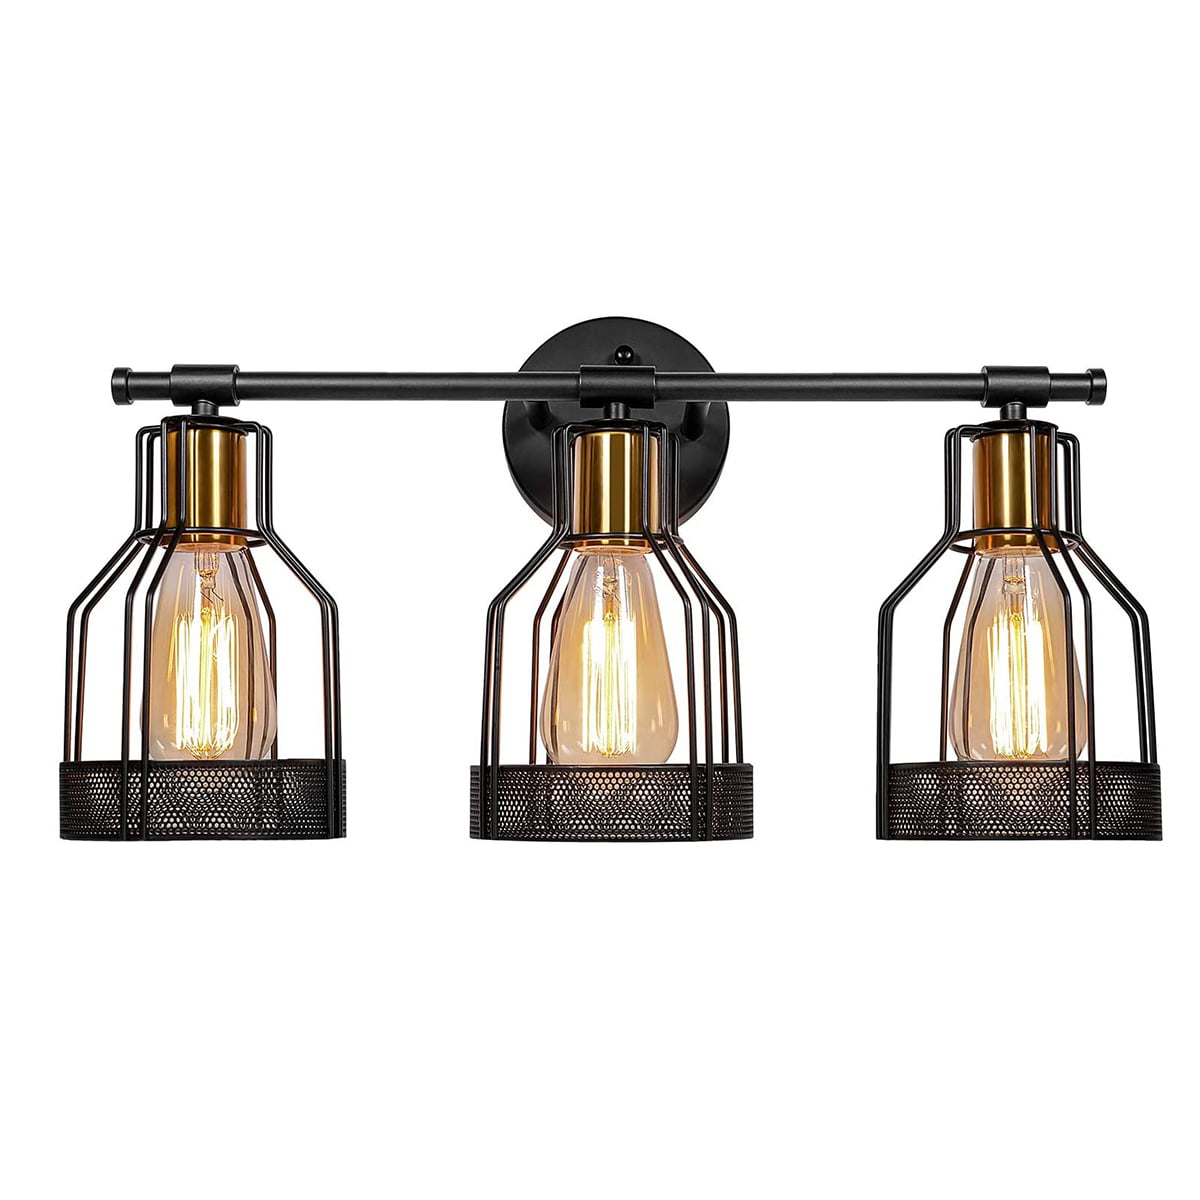 Industiral Bathroom Vanity Light Fixture Wall Sconce Over Mirror Glass Wall Lamp 